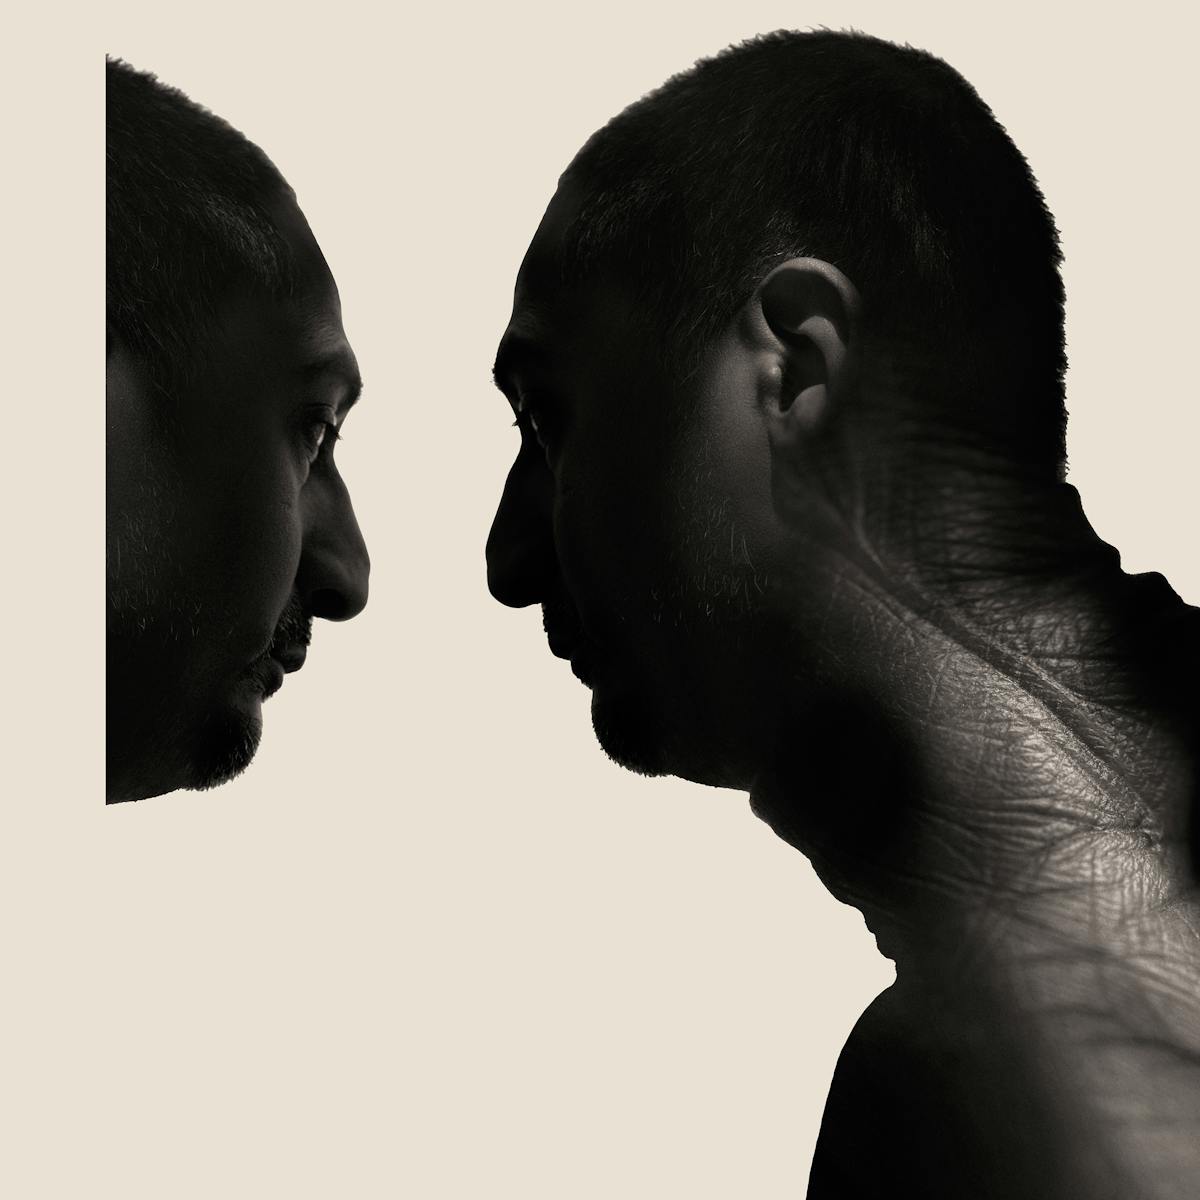 Photographic portrait of a man's head and shoulders in profile, looking to the left. He is pictured in silhouette against a cream background. Overlaid onto his neck and shoulders is an image of a scar, showing the texture of the skin and the scar tissue. The man's face is looking at a reflection of himself as if in a mirror although his reflection is cut off so only half of this head can be seen.